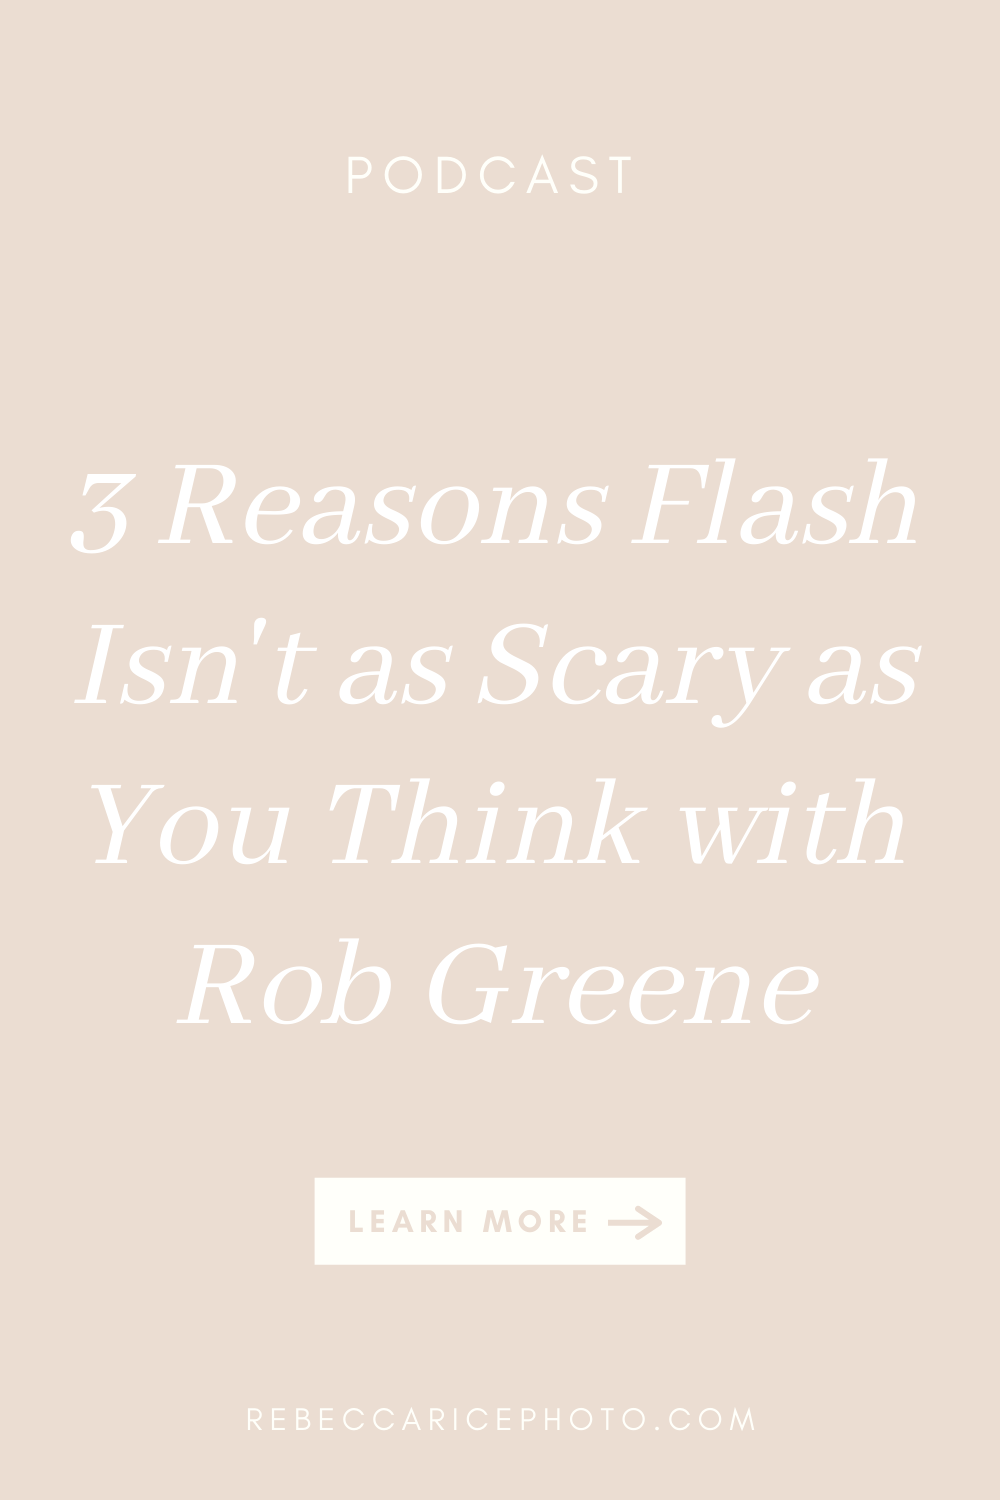 3 Reasons Flash Isn't as Scary as You Think